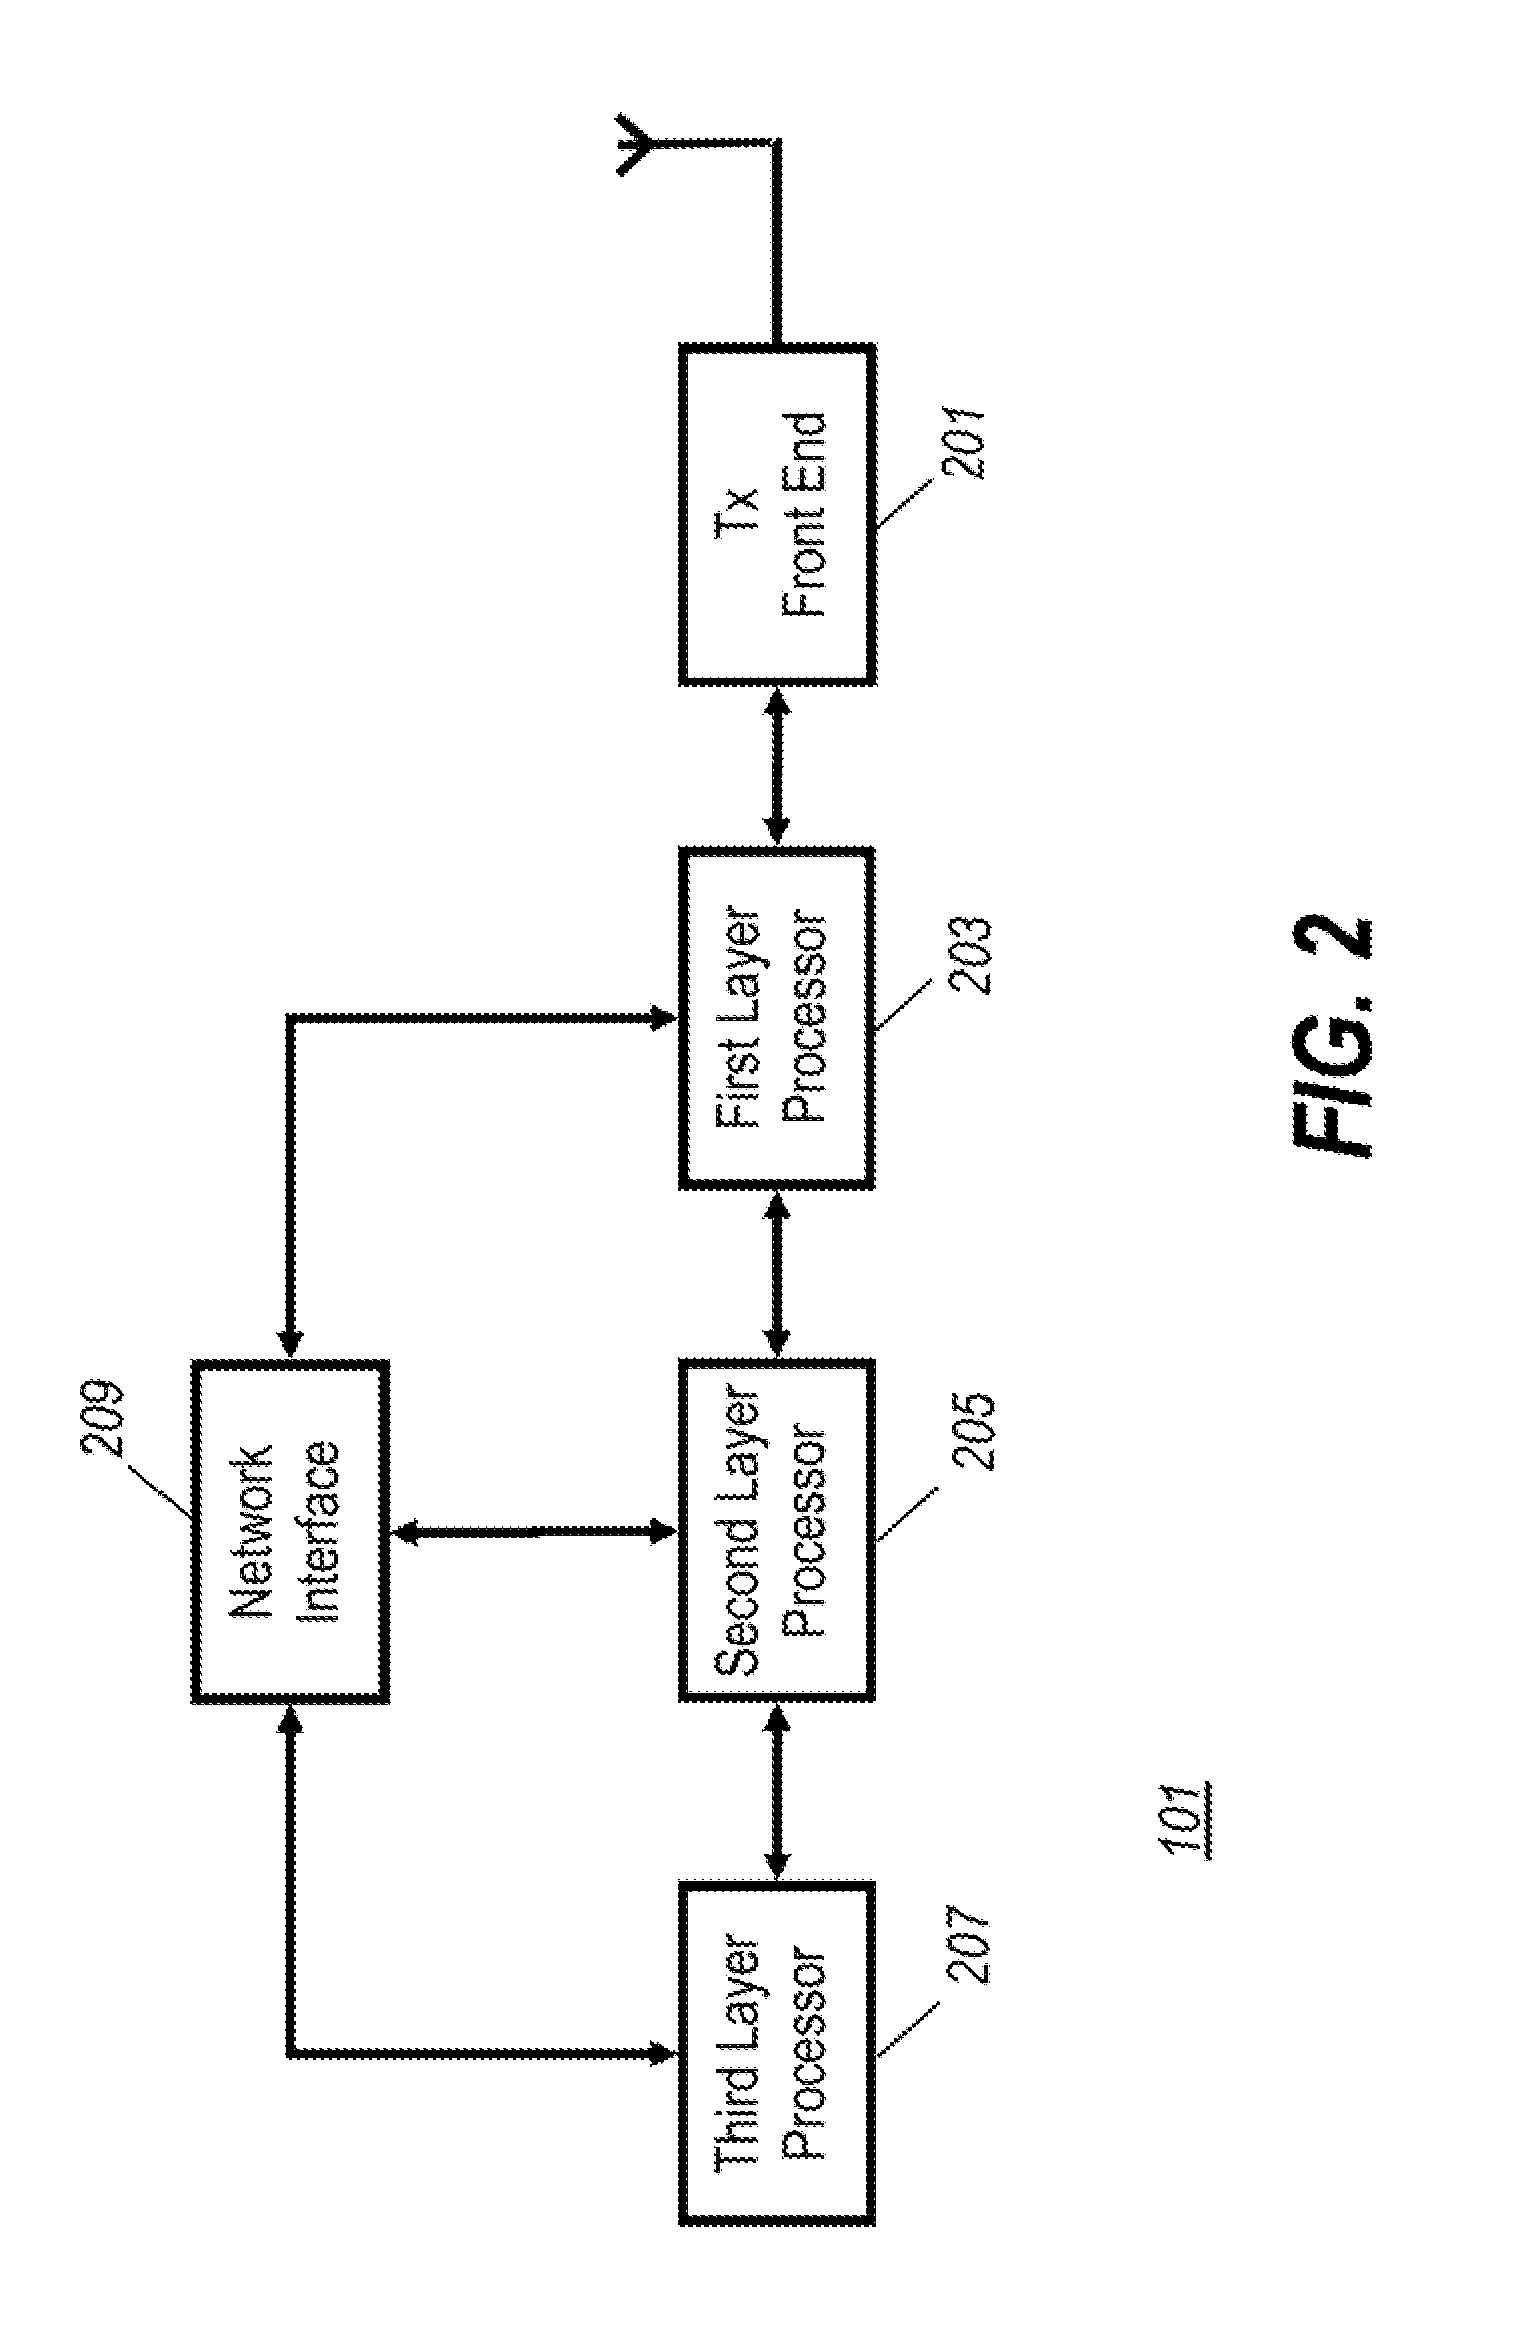 Cellular communication system and a method of operation therefor